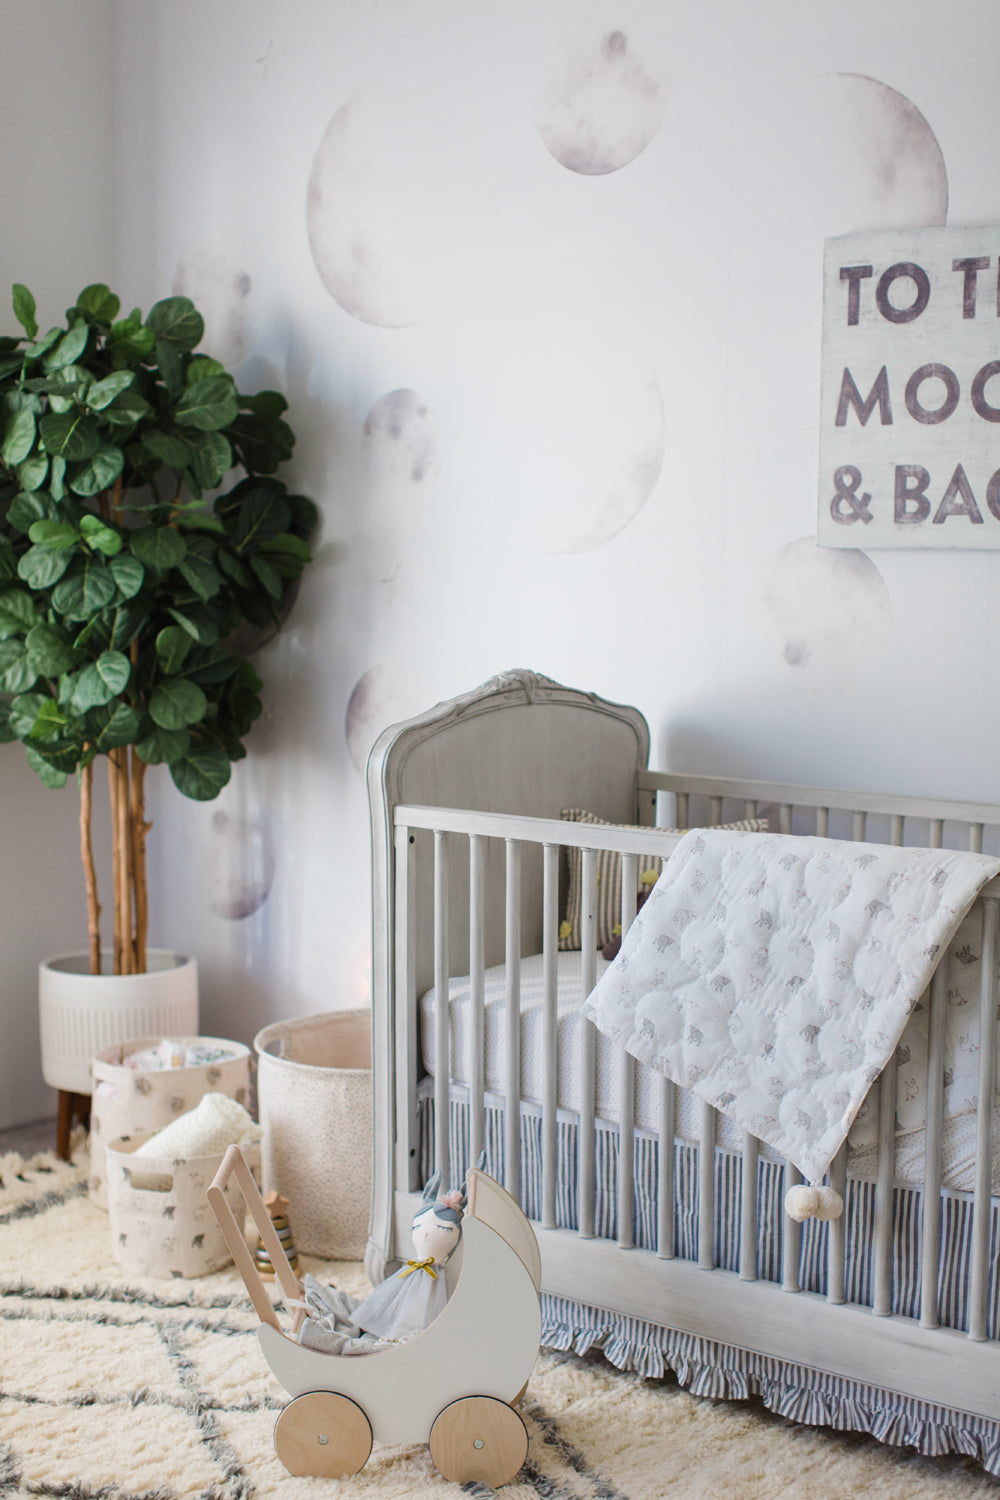 We're Over The Moon - Caitlin Lindquist's Nursery Style